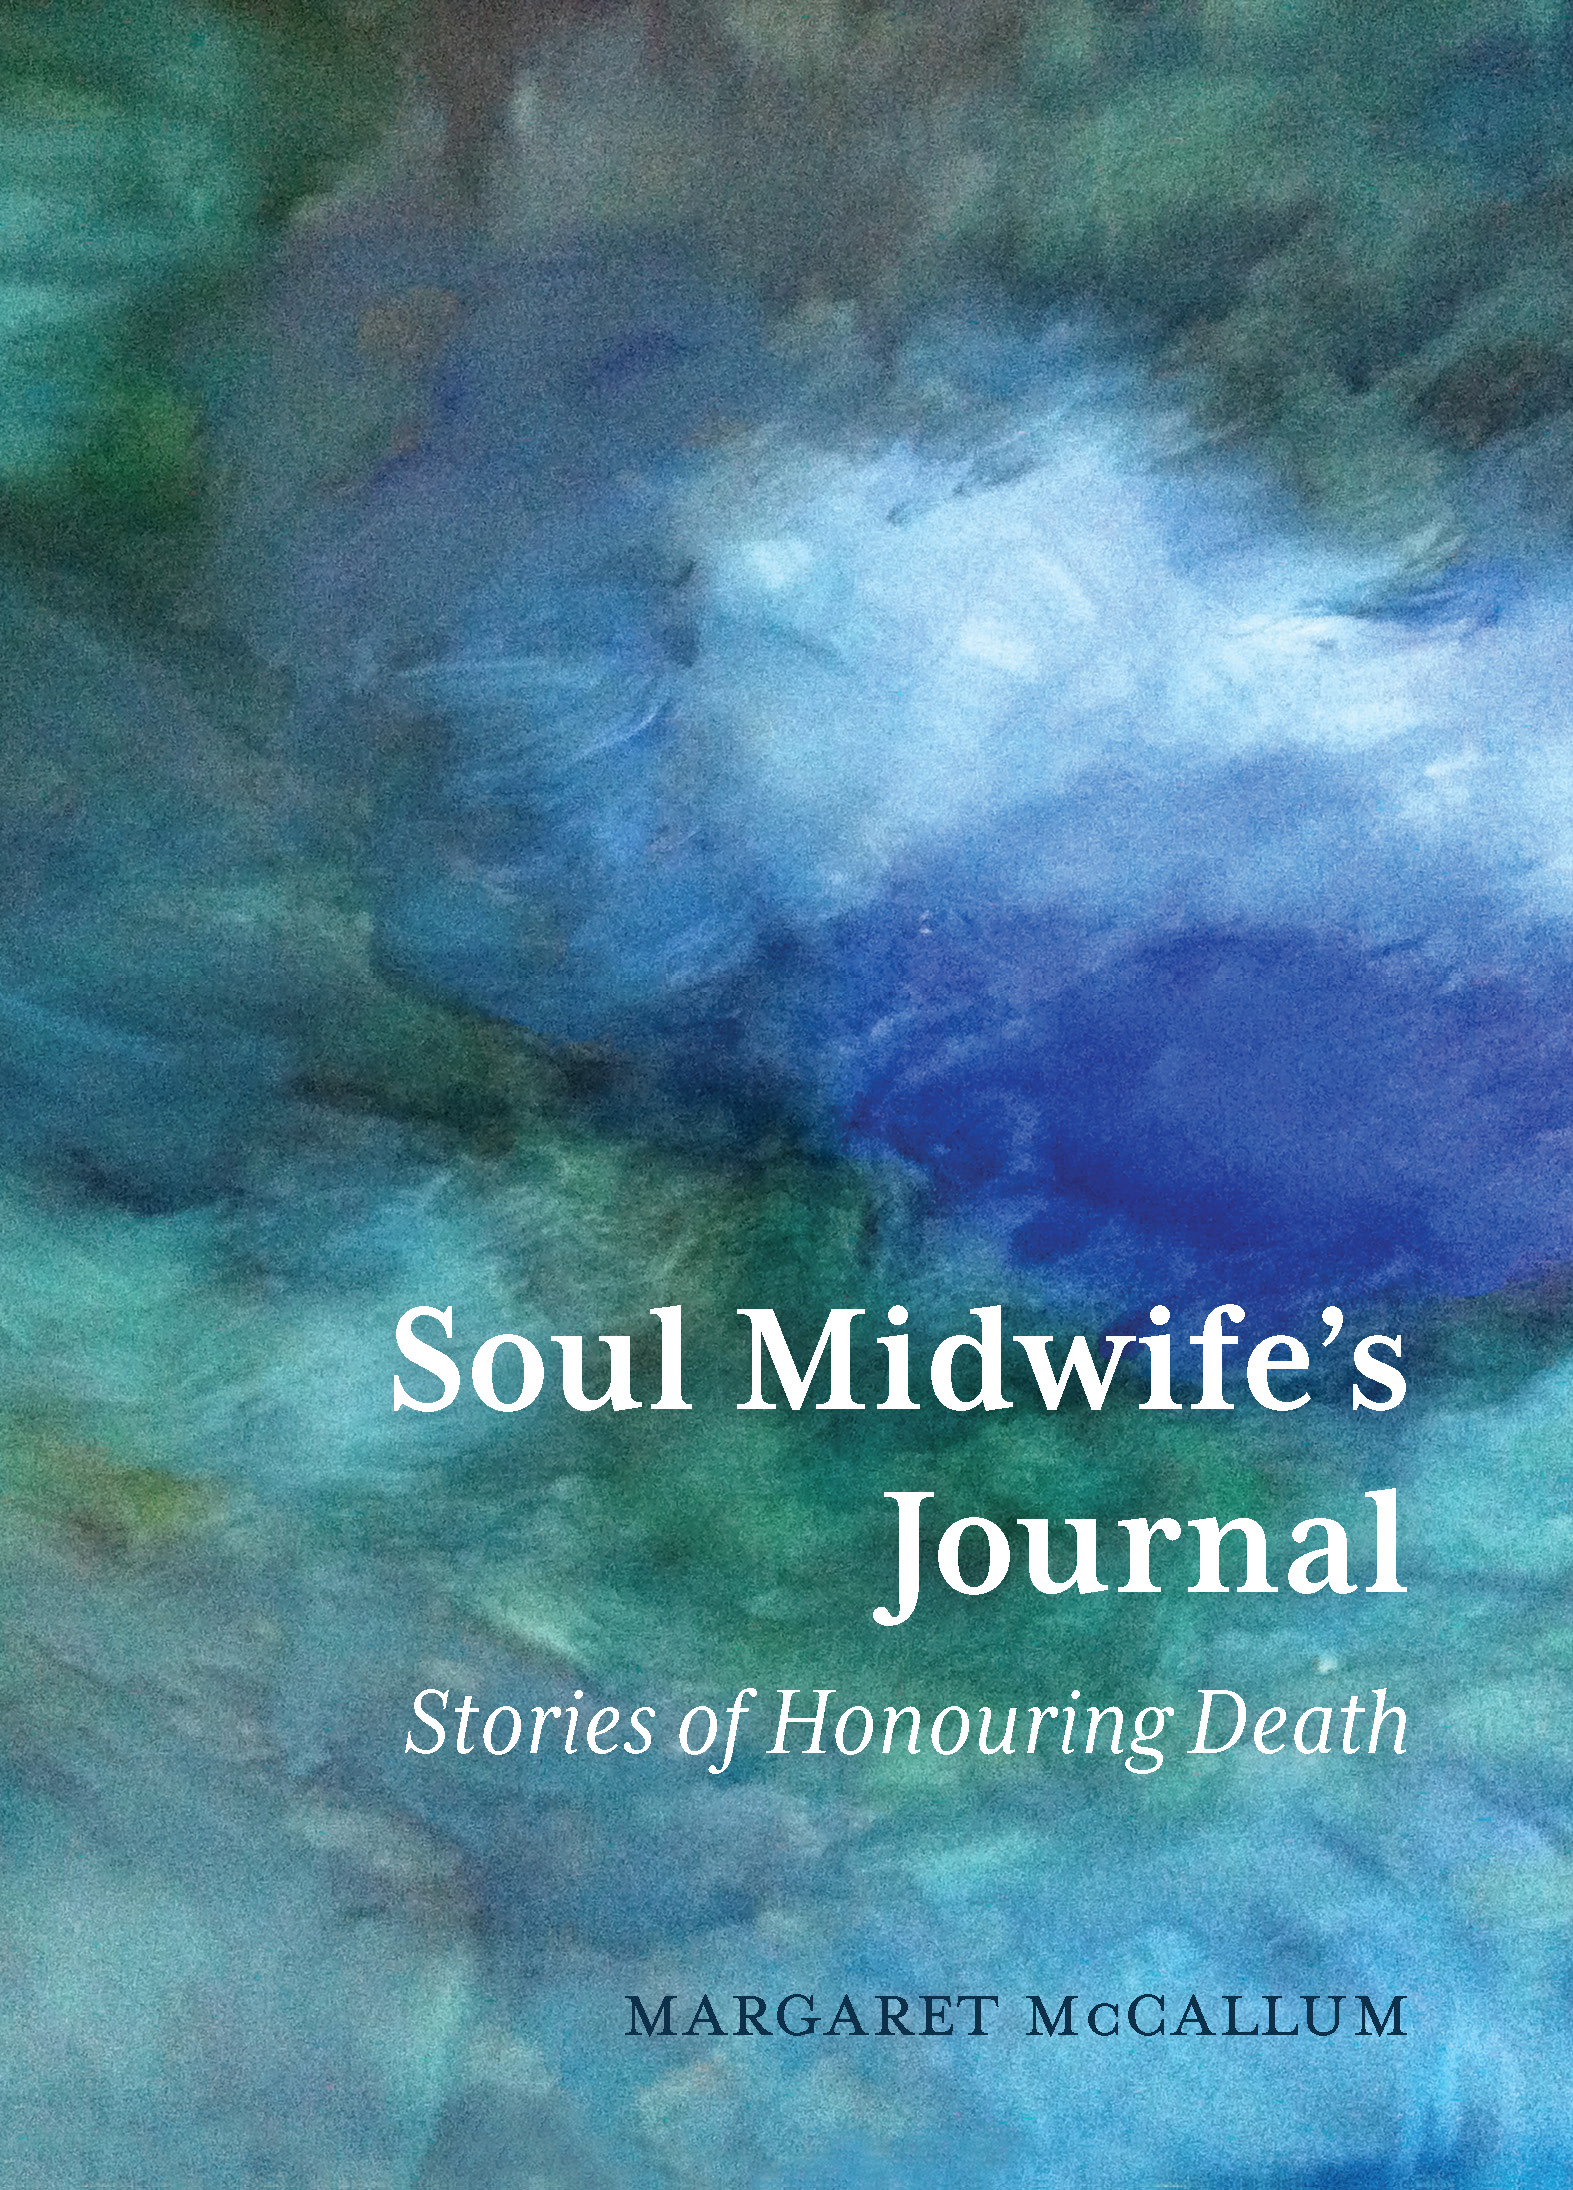 Soul Midwife's Journal<br><span style="text-transform:none;letter-spacing:0;font-style:italic">Stories honouring death</span>